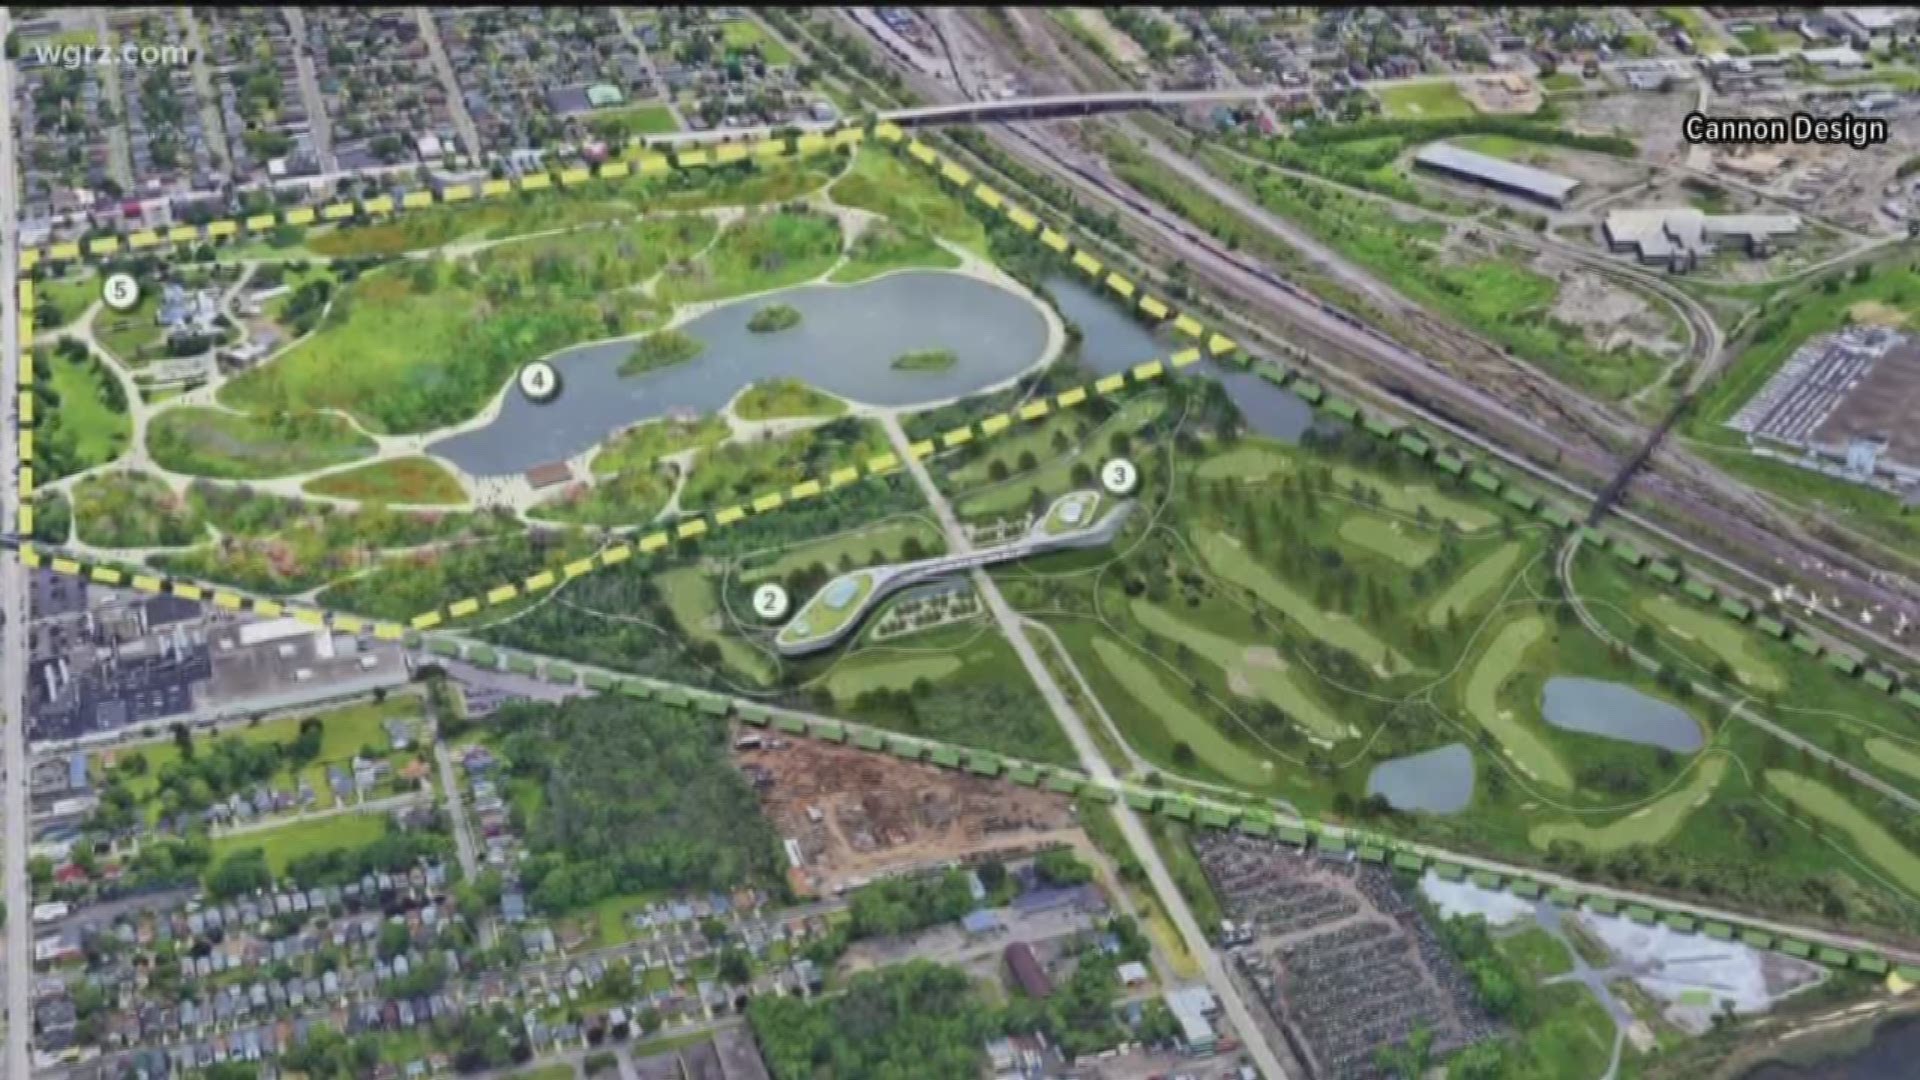 the plans would revive the arboretum near the gardens... with a lake and walking paths.